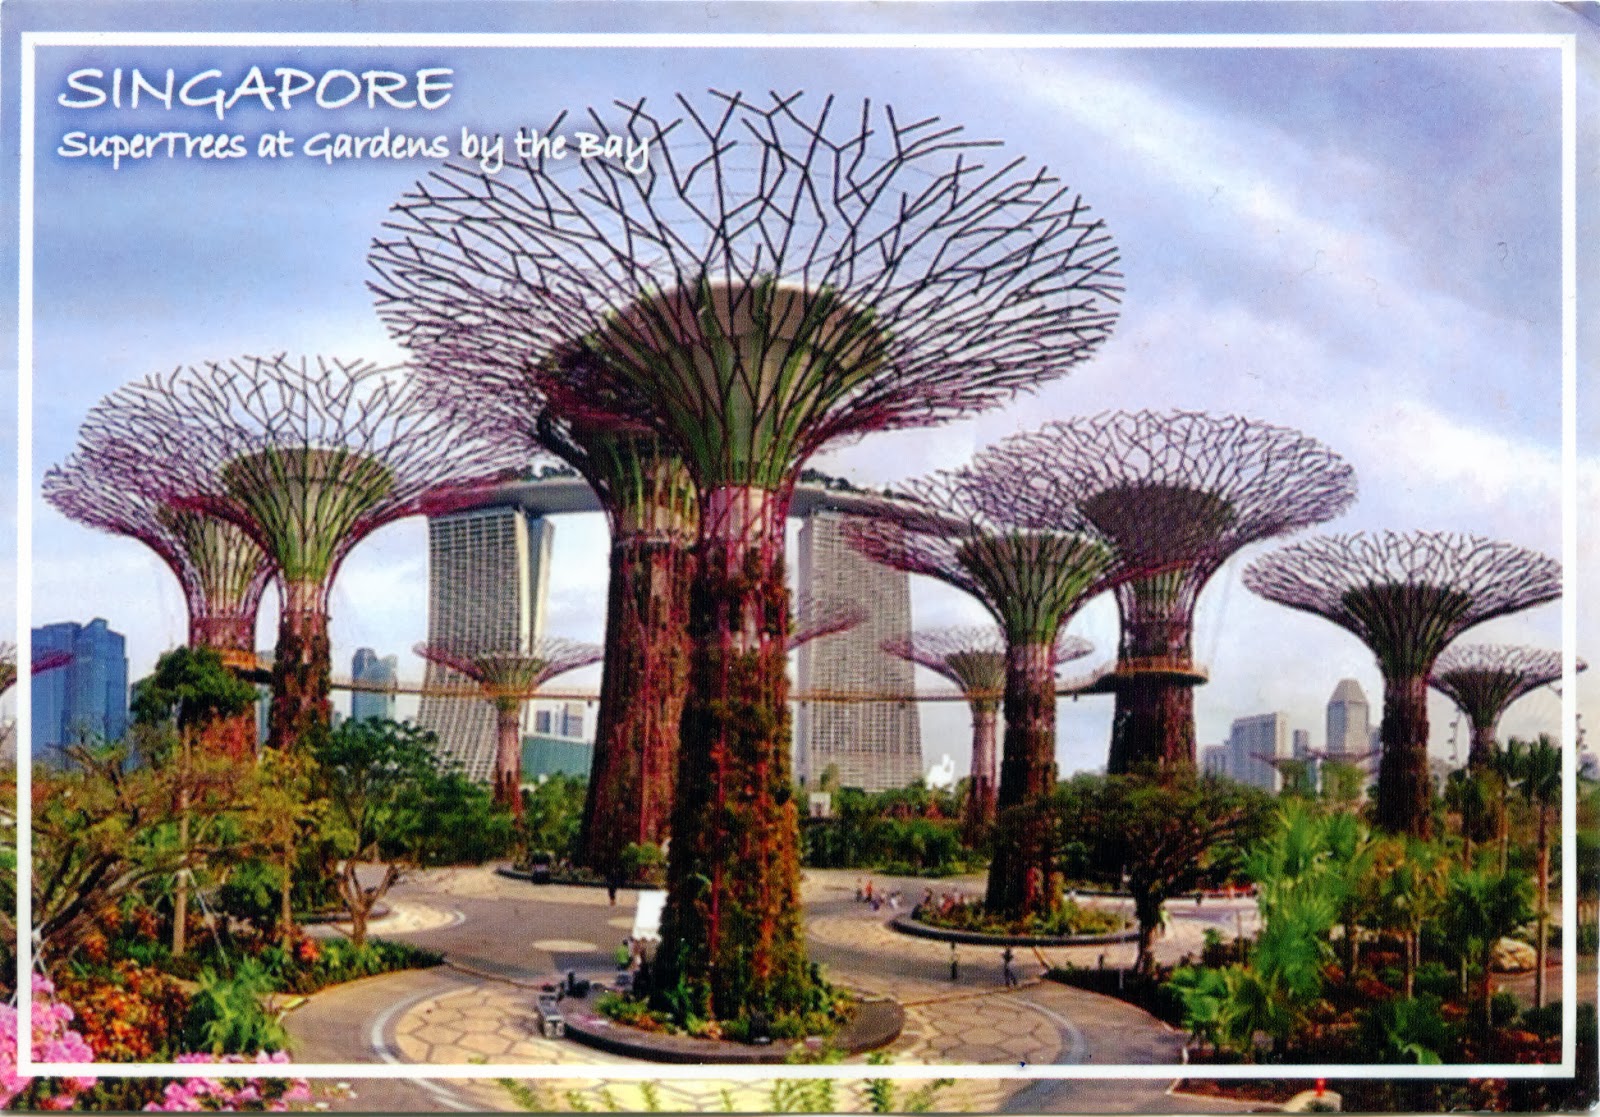  , COME TO MY HOME!: 0974 SINGAPORE  Supertrees in Gardens by the Bay